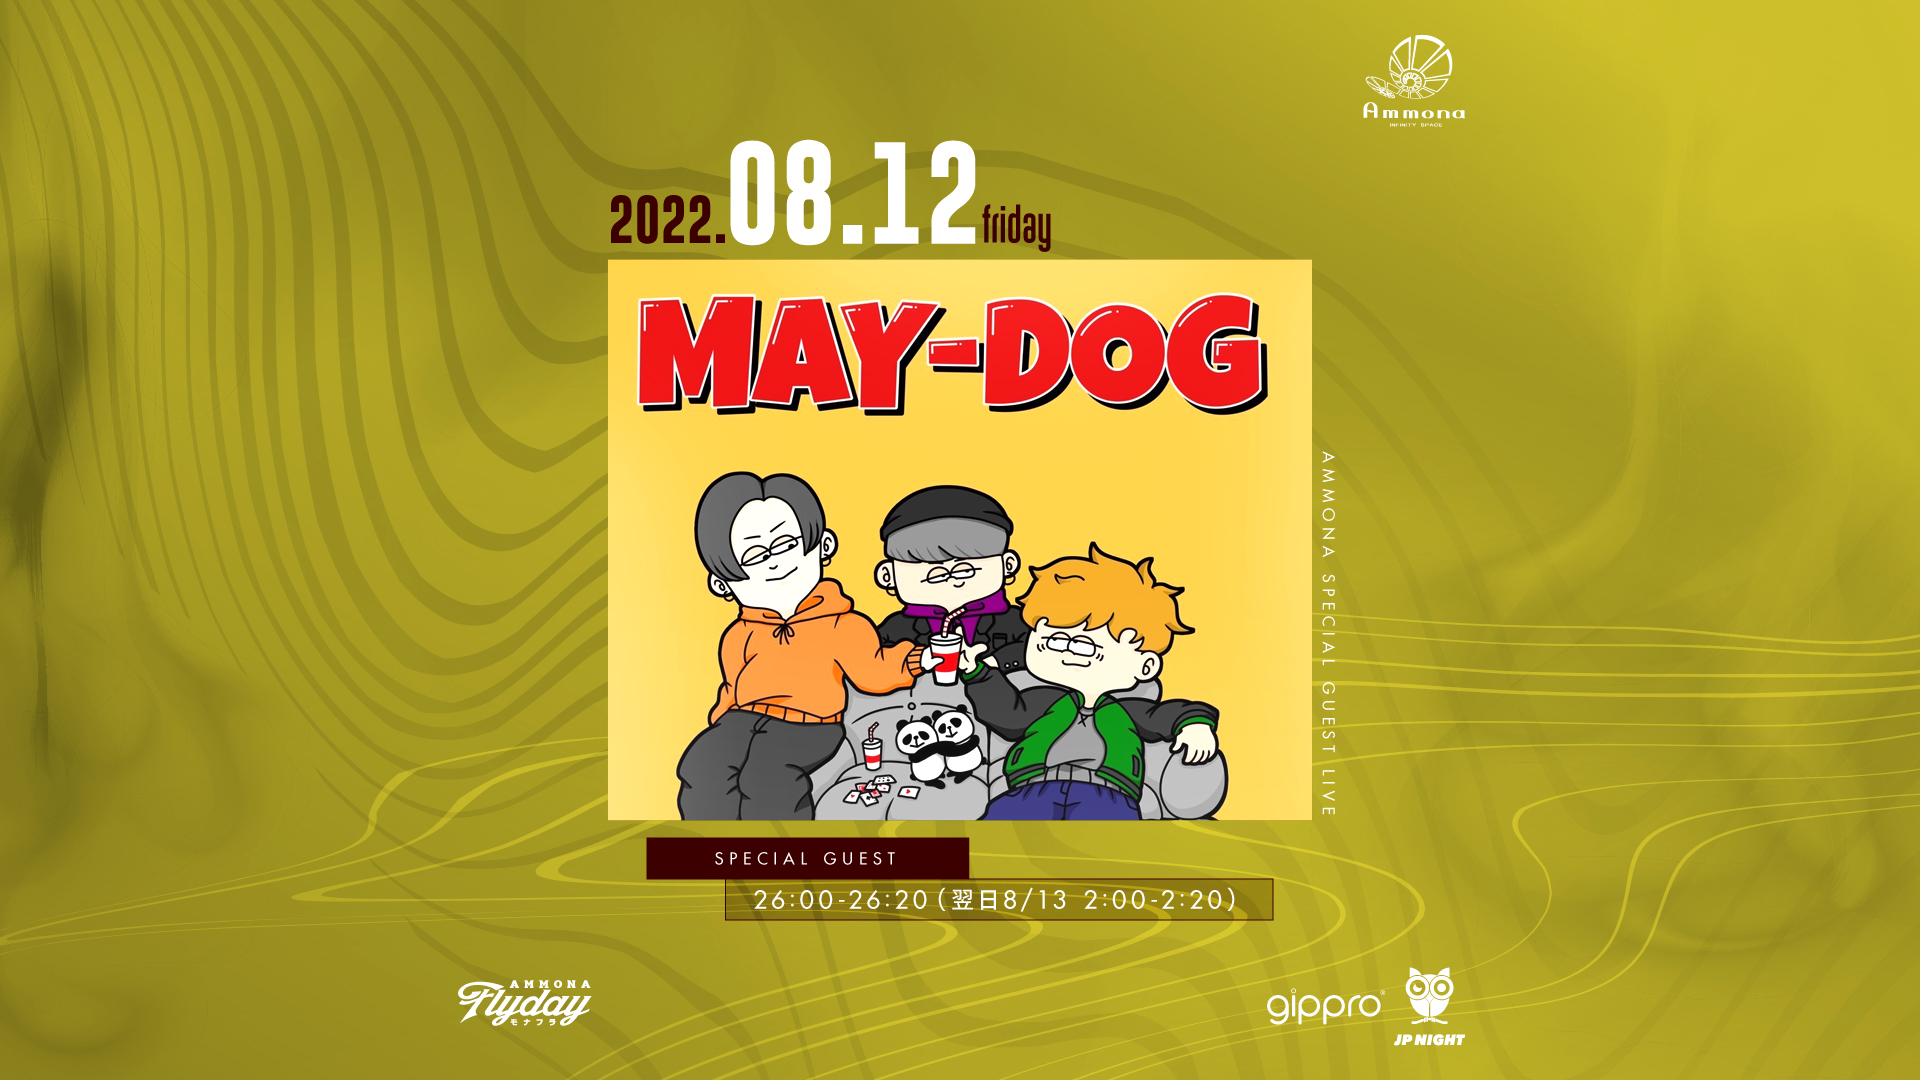 SPECIAL GUEST : MAY-DOG